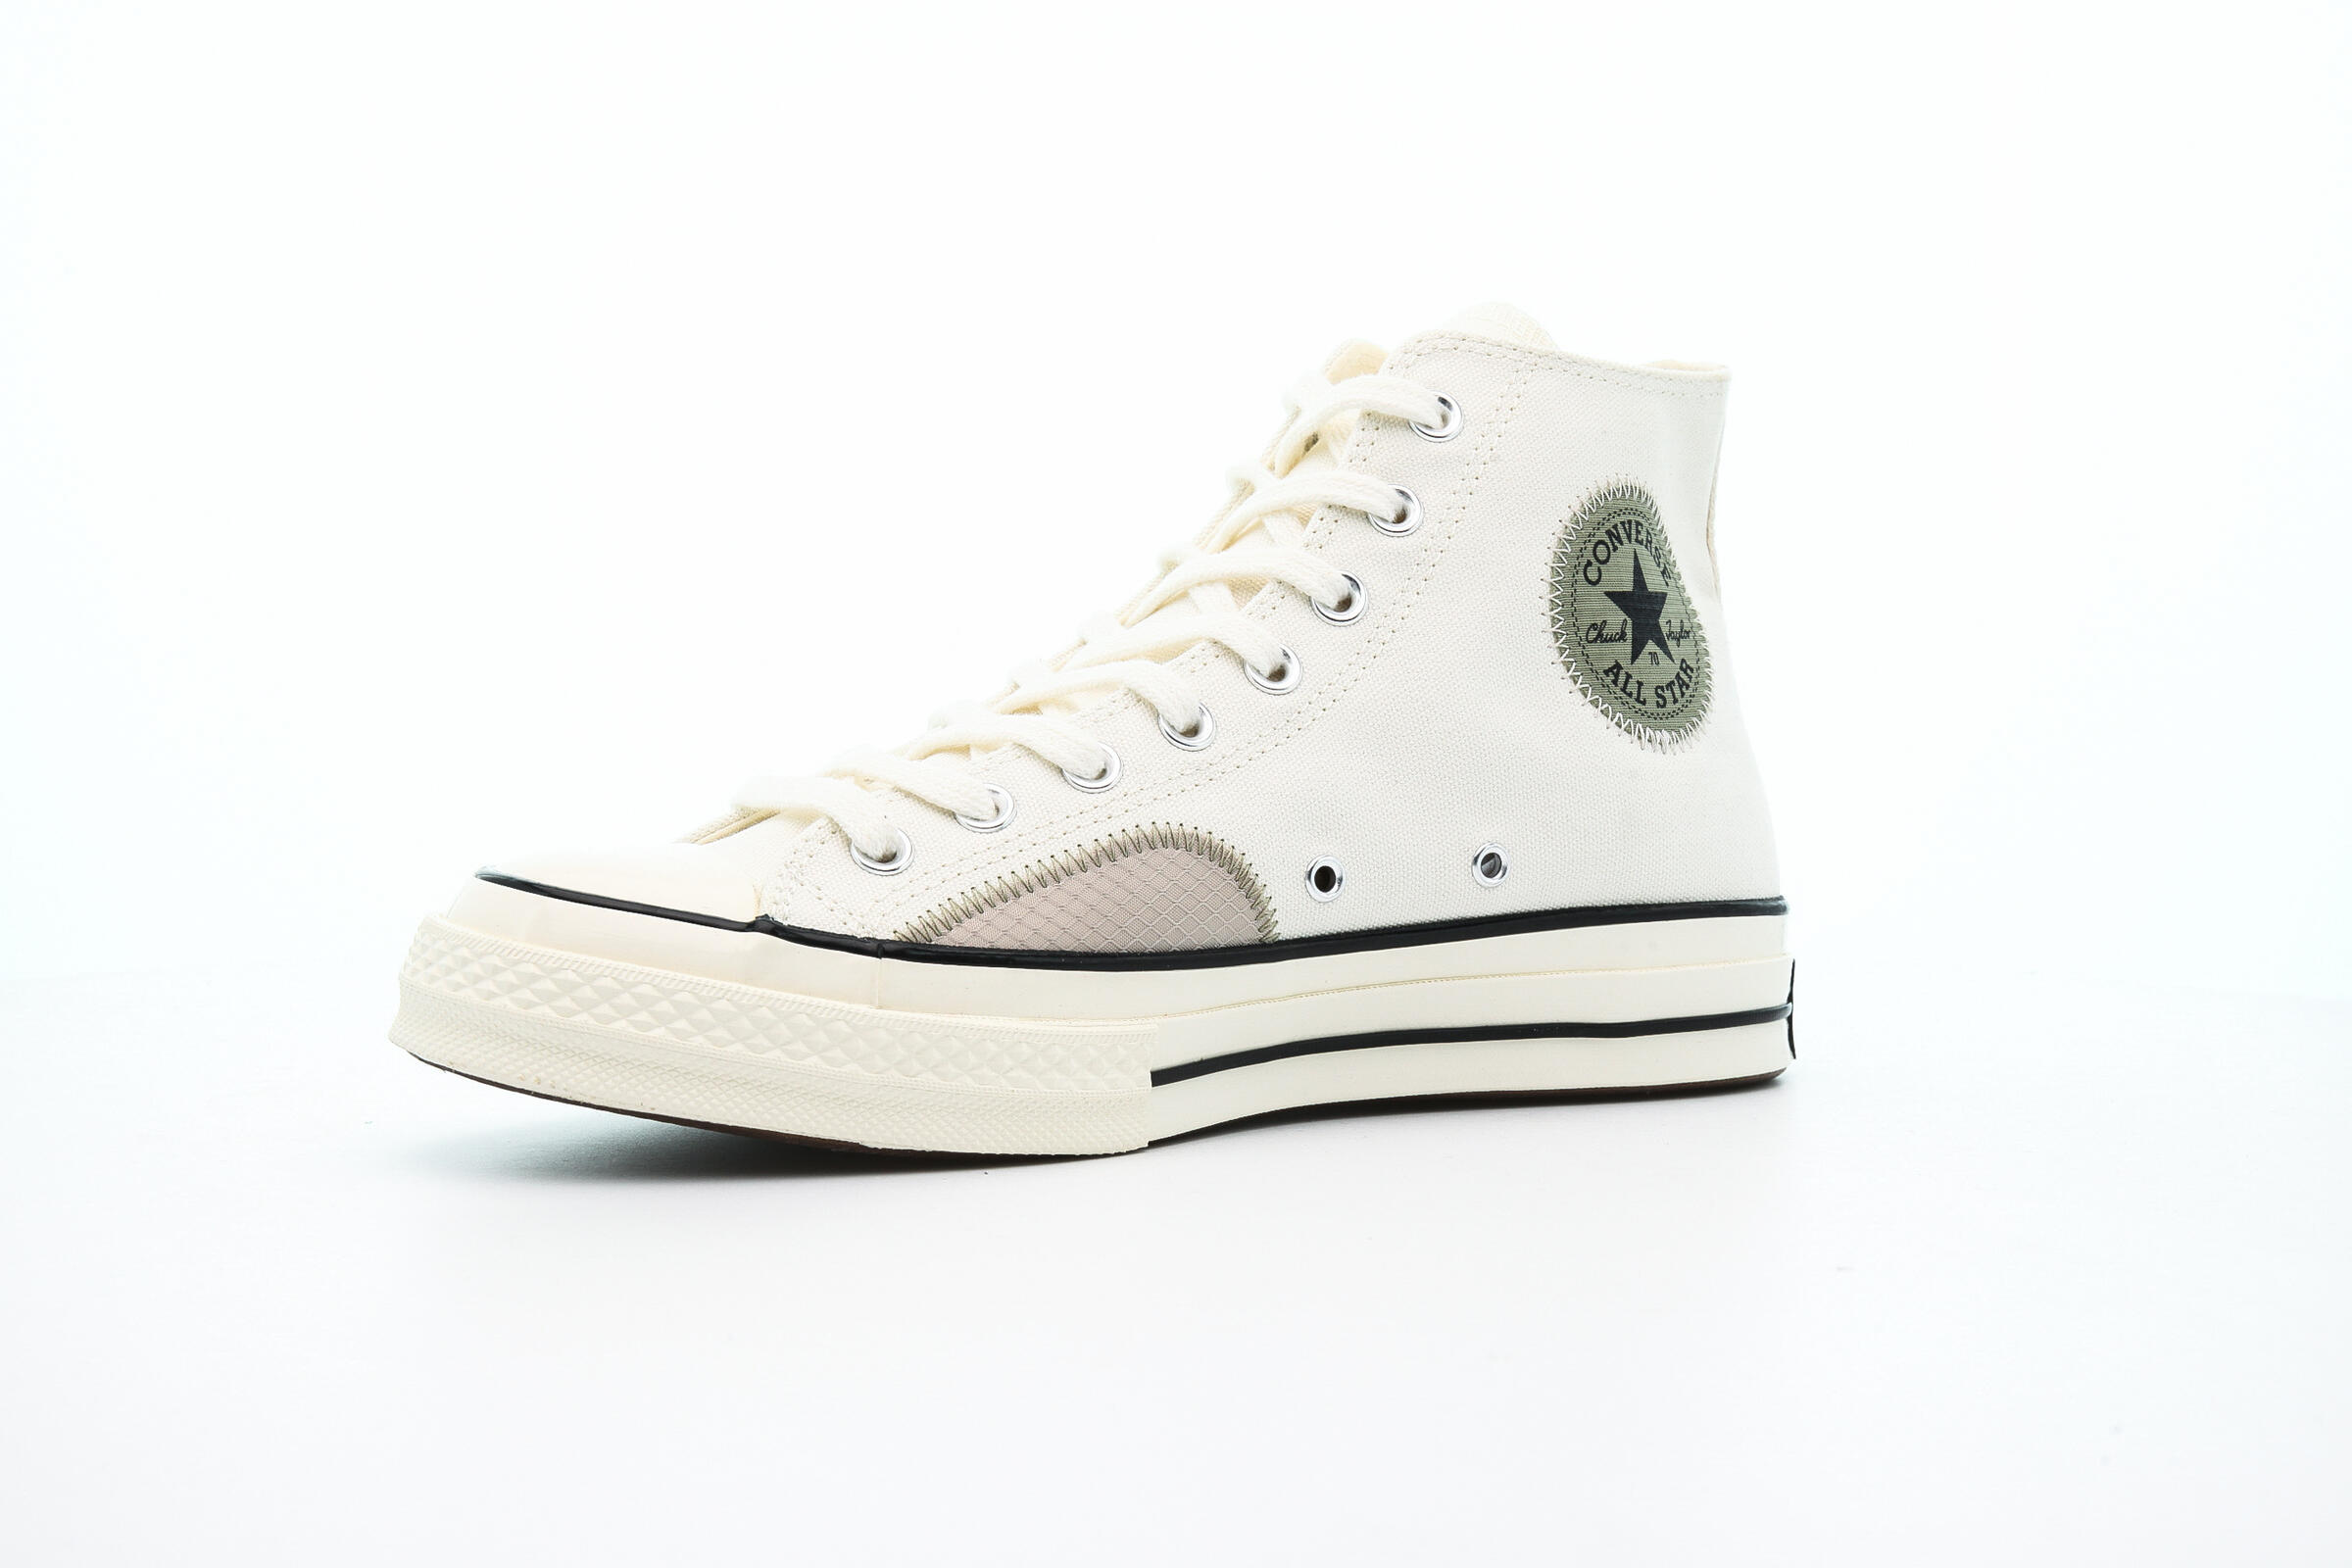 Converse CHUCK 70 RIPSTOP AND CANVAS "EGRET"